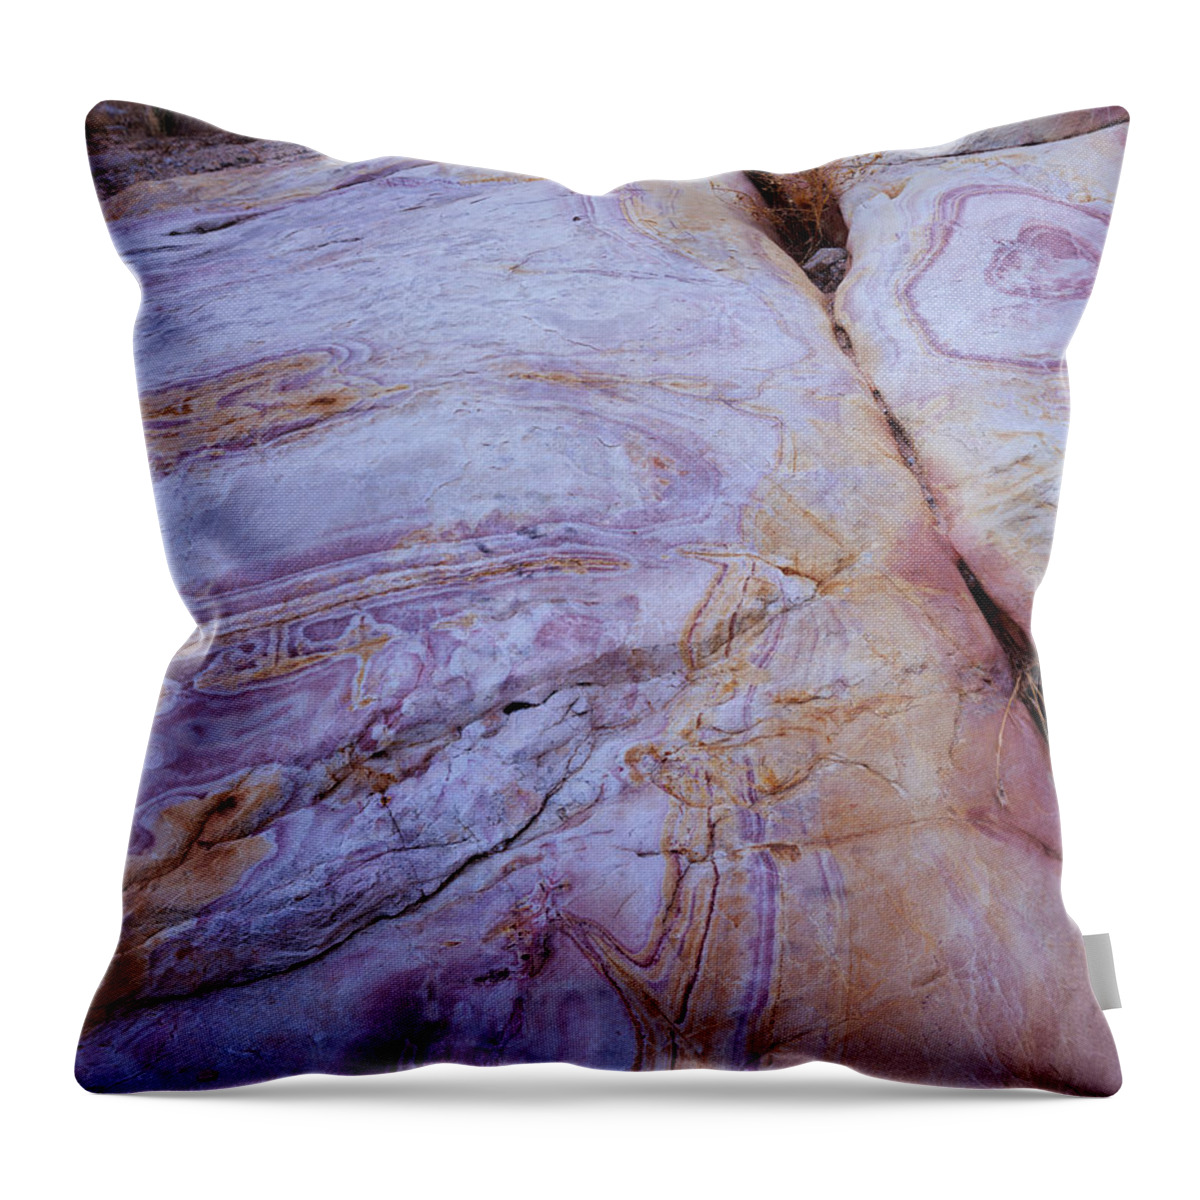 Nevada Throw Pillow featuring the photograph Muddy Mt. Sandstone B by Tom Daniel